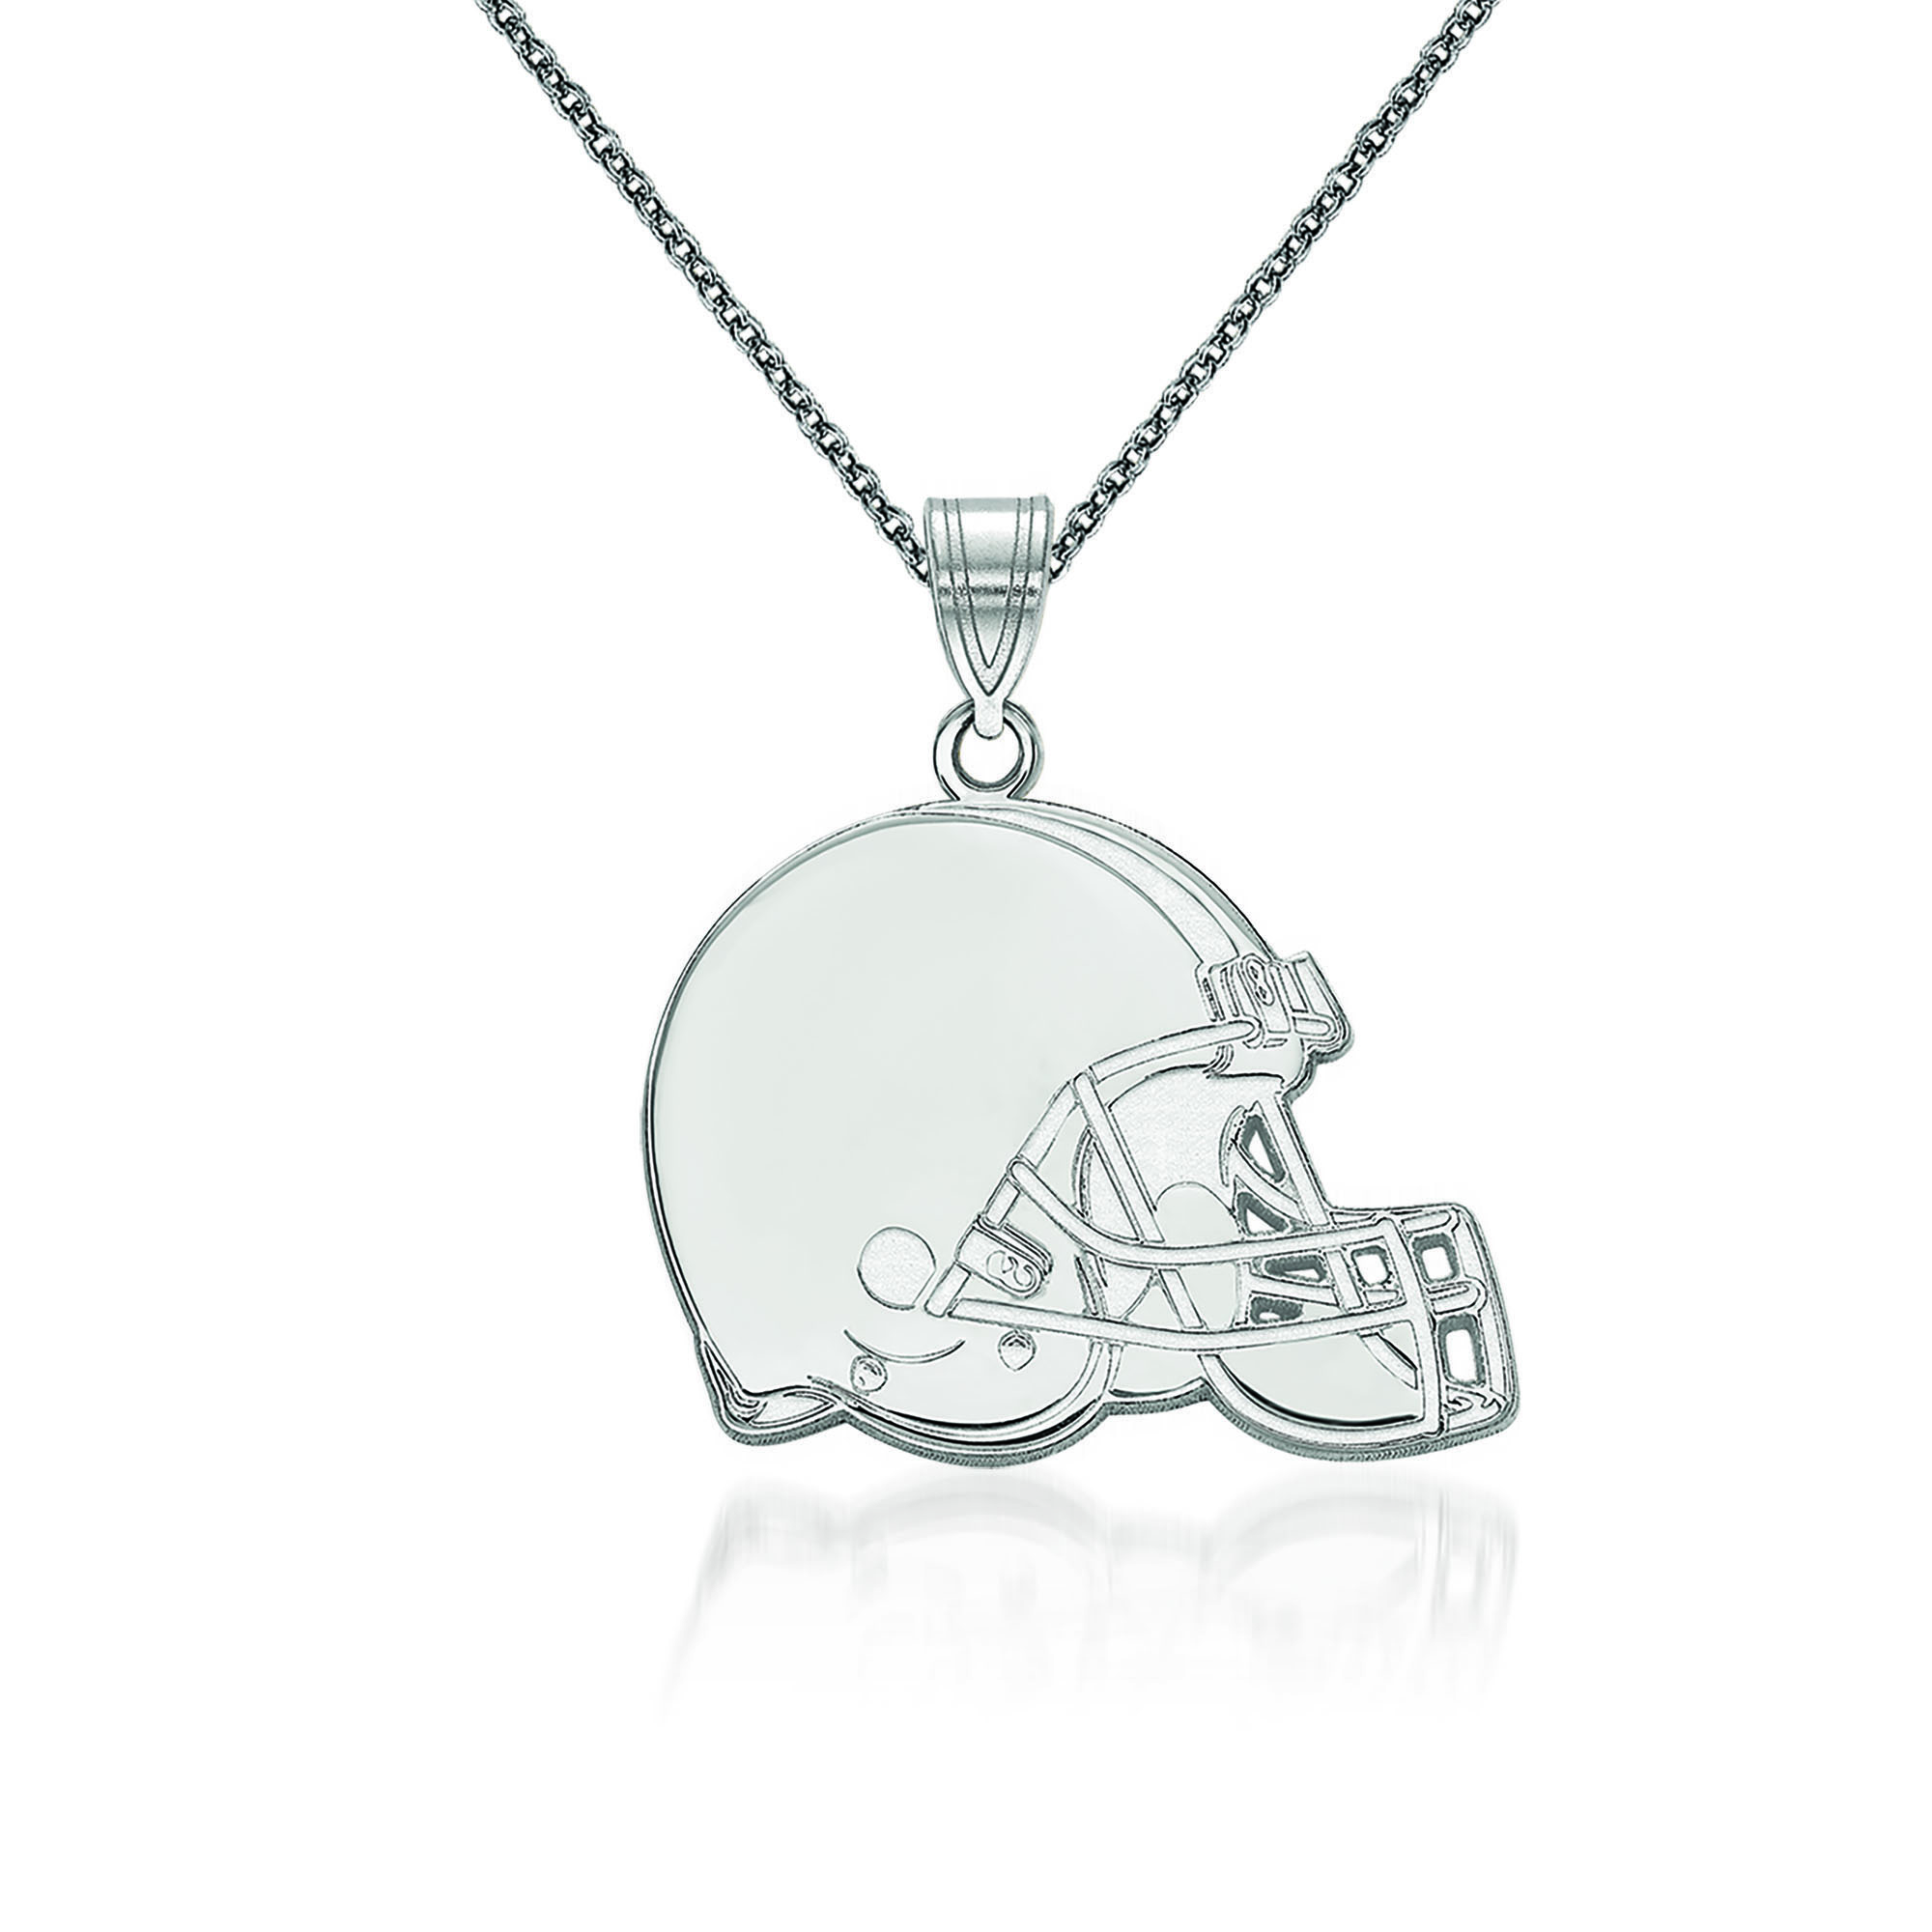 14kt White Gold NFL Cleveland Browns Pendant Necklace. 18" | Ross-Simons